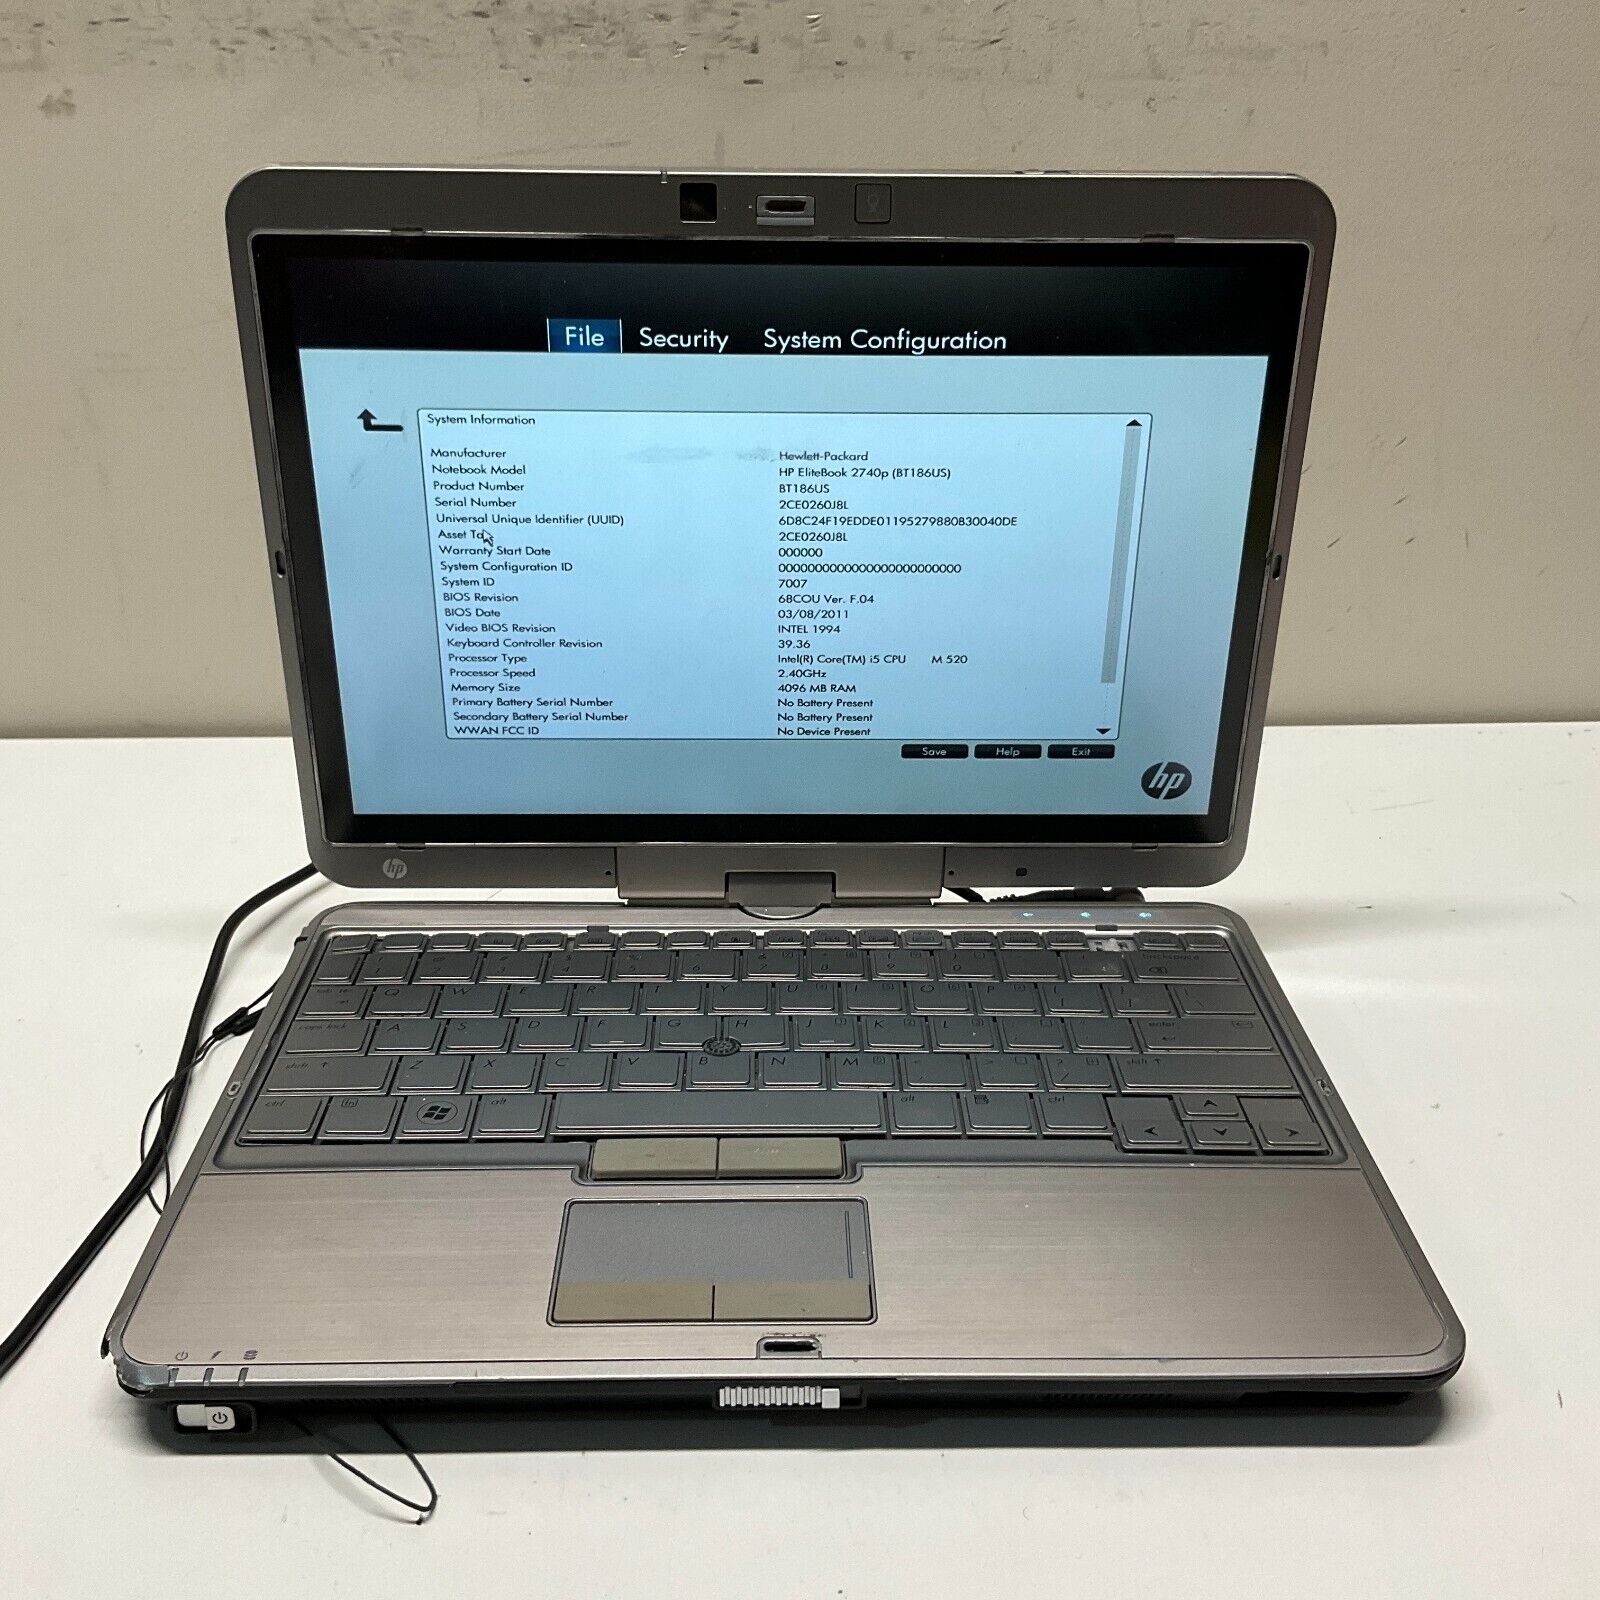 HP EliteBook 2740p Laptop PC Tablet - Core i5-M520 @ 2.40Ghz - NO HDD - BOOTS